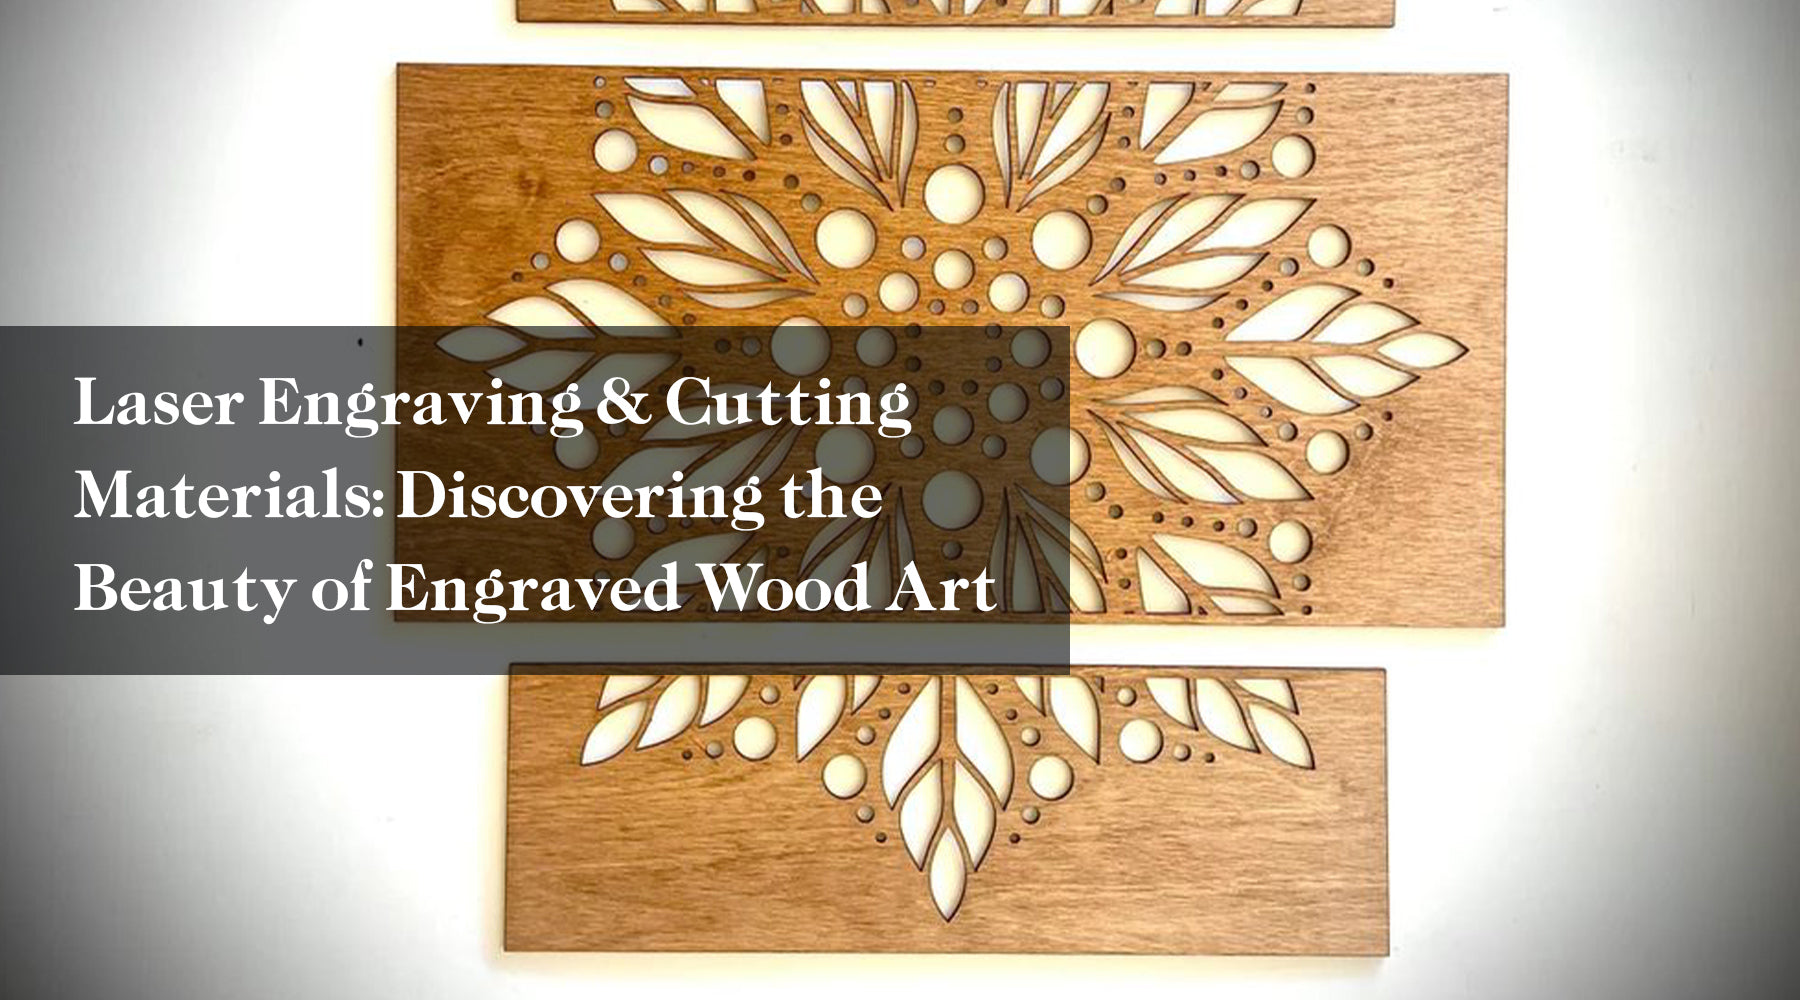 Laser Engraving & Cutting Materials: Discovering the Beauty of Engraved Wood Art